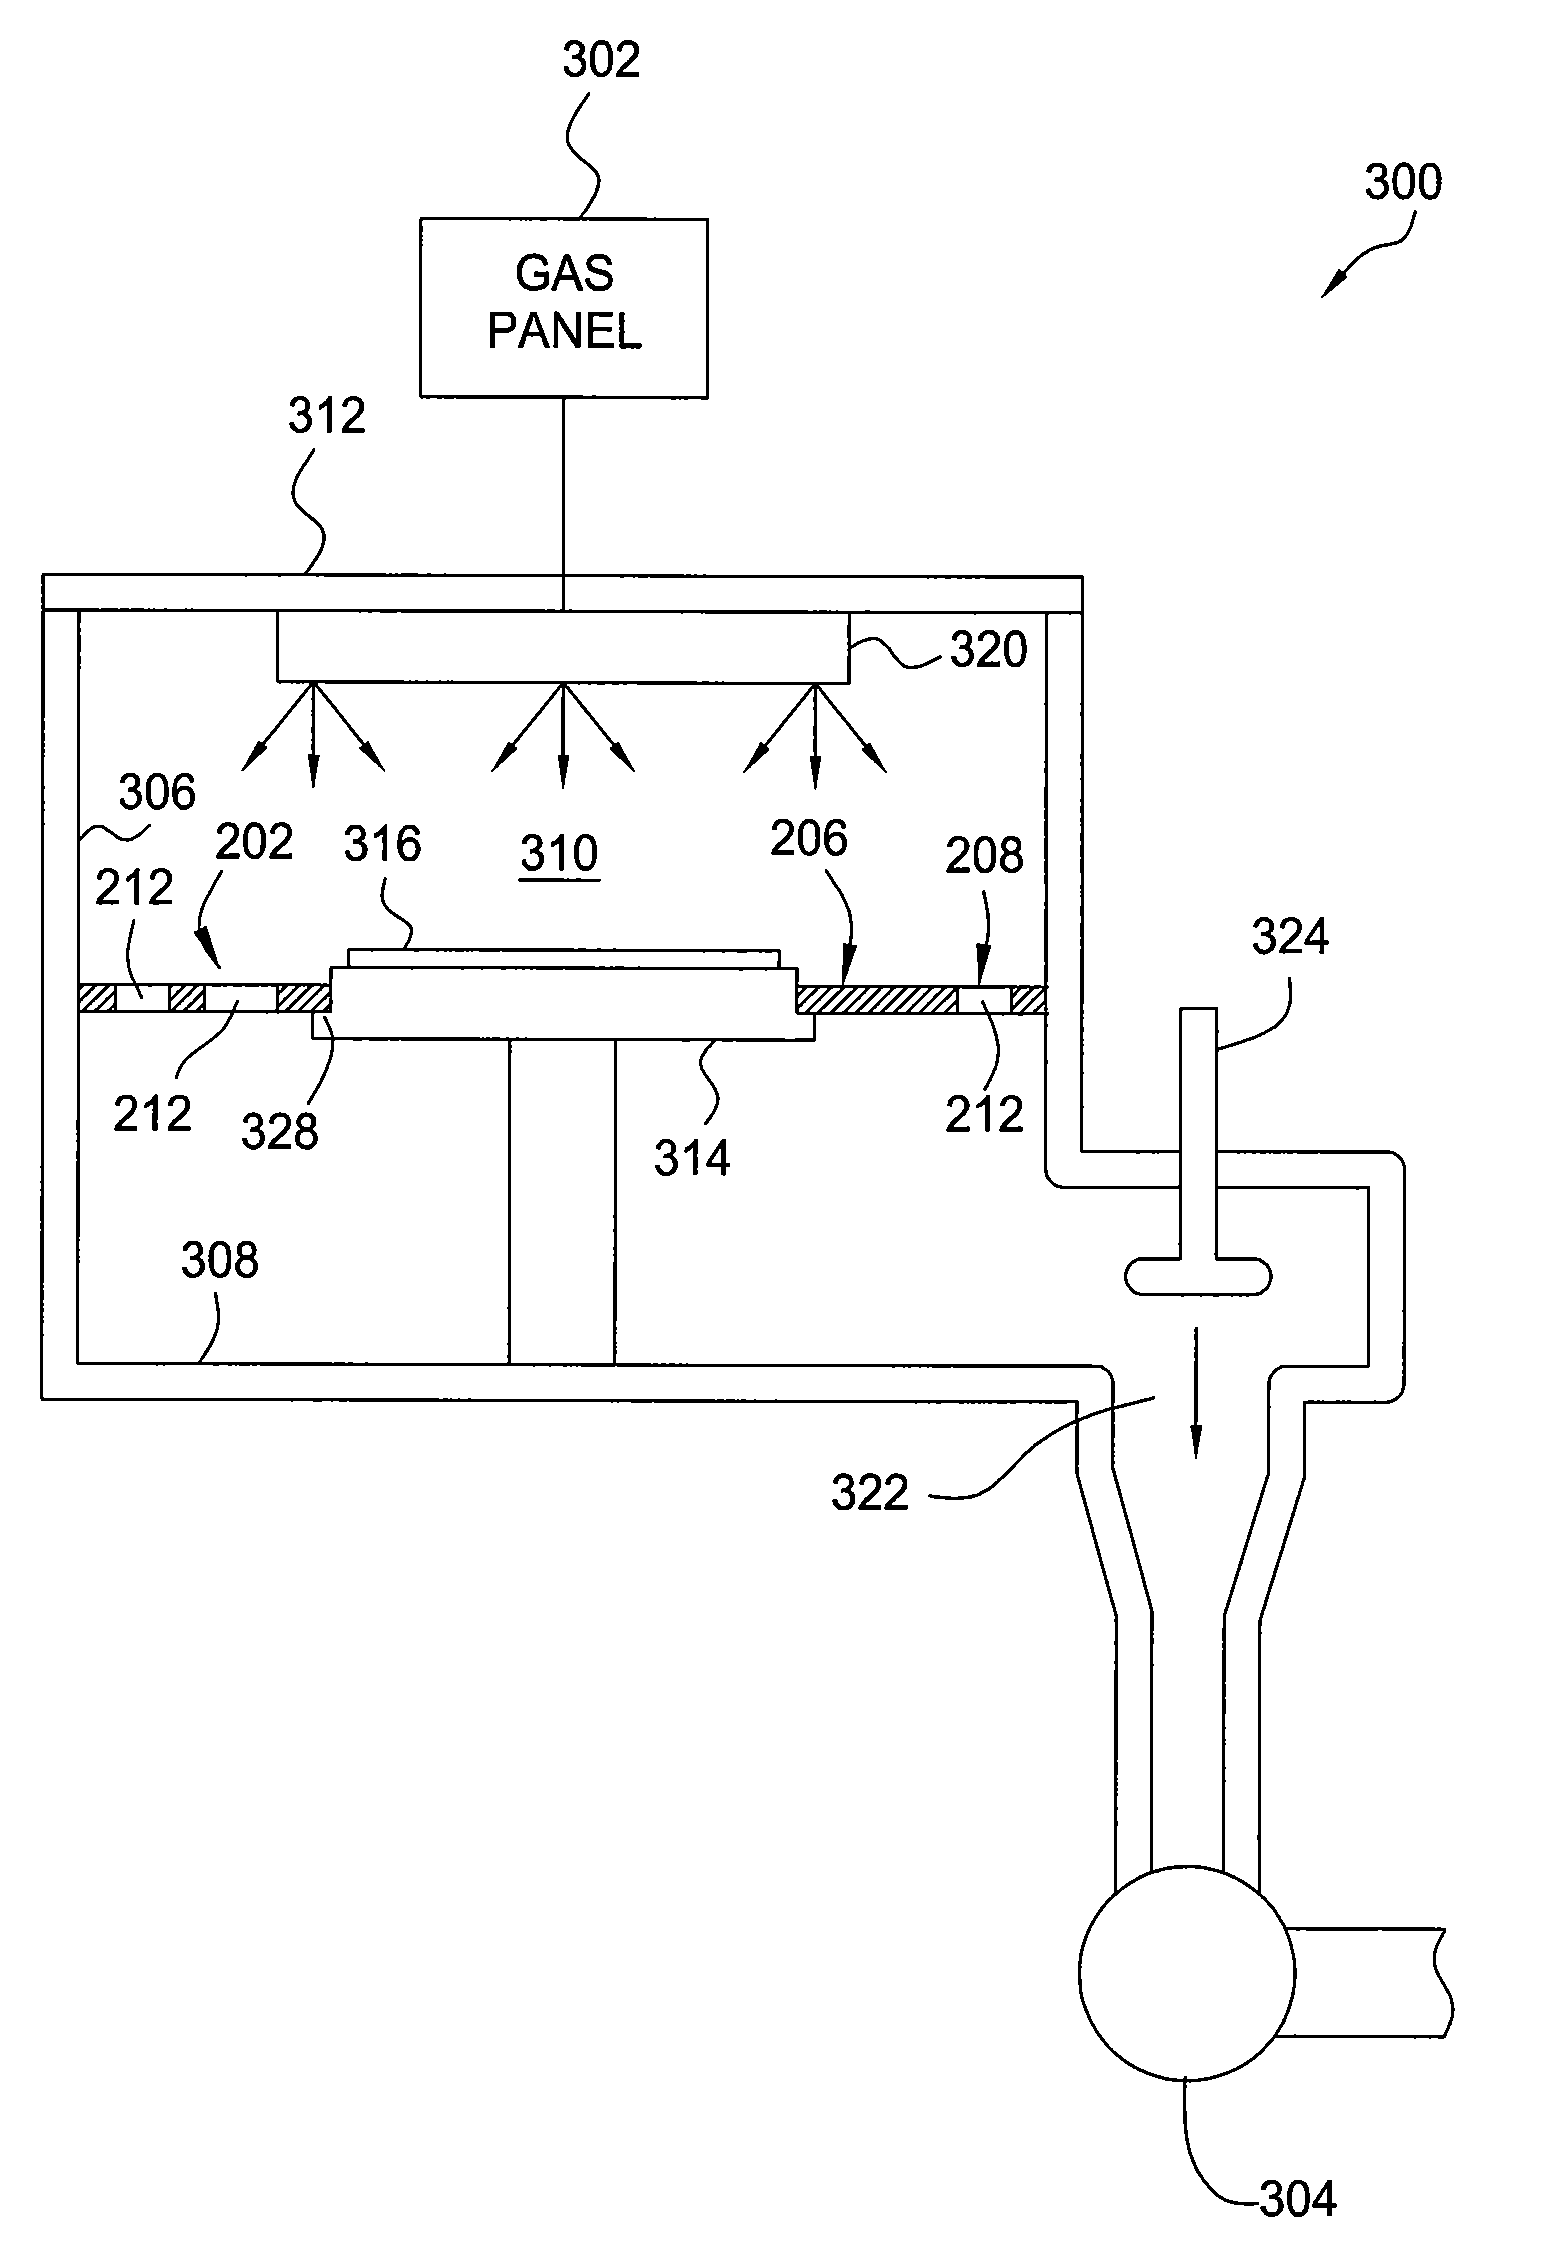 Gas flow equalizer plate suitable for use in a substrate process chamber